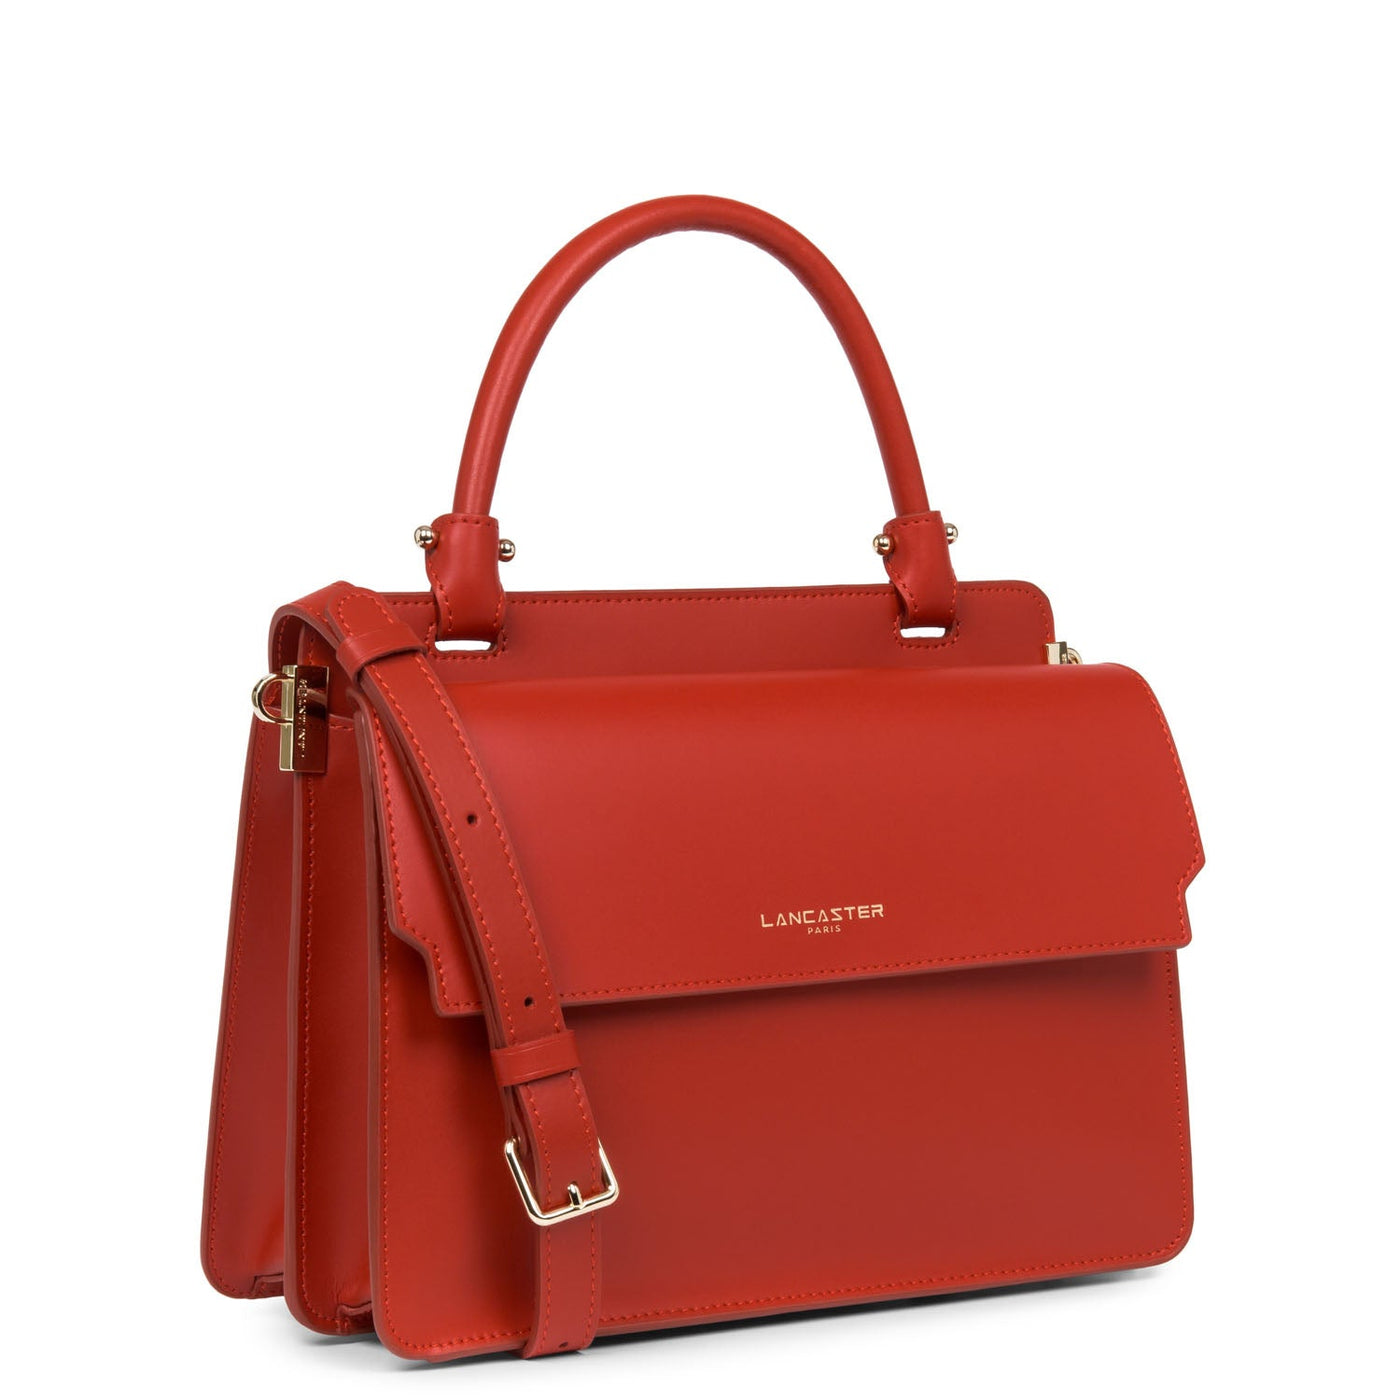 handbag - smooth or #couleur_rouge